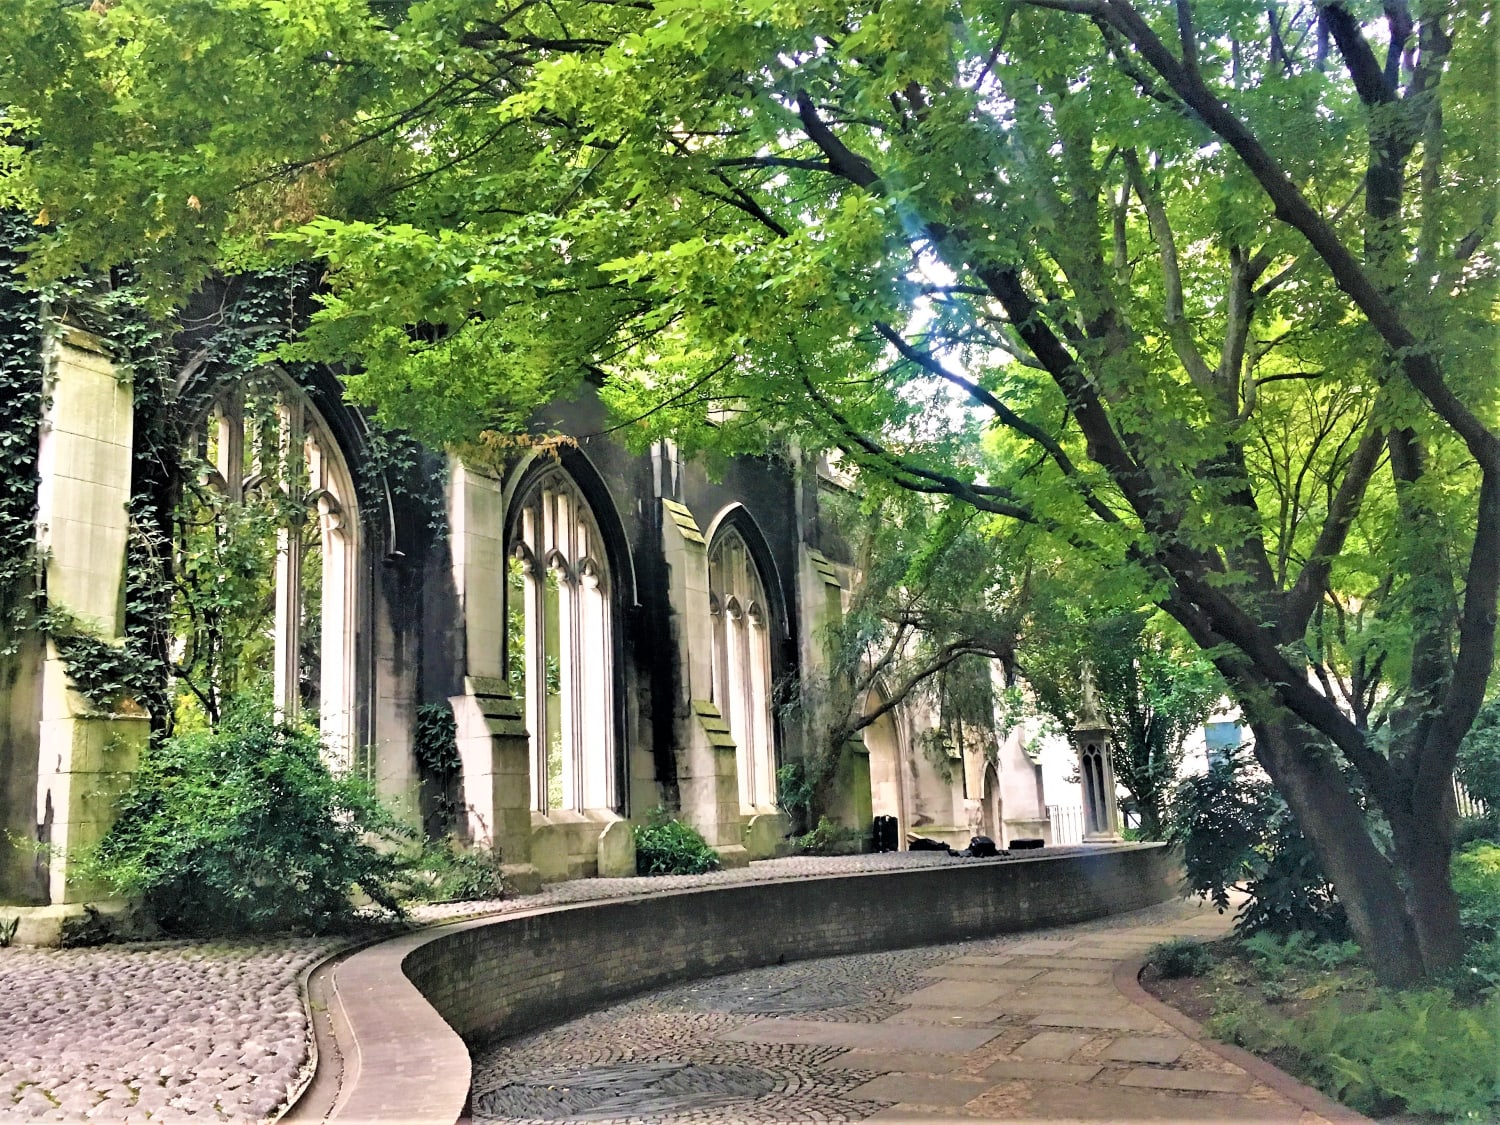 Serenity amongst Ruins - 8 Reasons Why you should visit St Dunstan in the East, London - My Timeless Footsteps